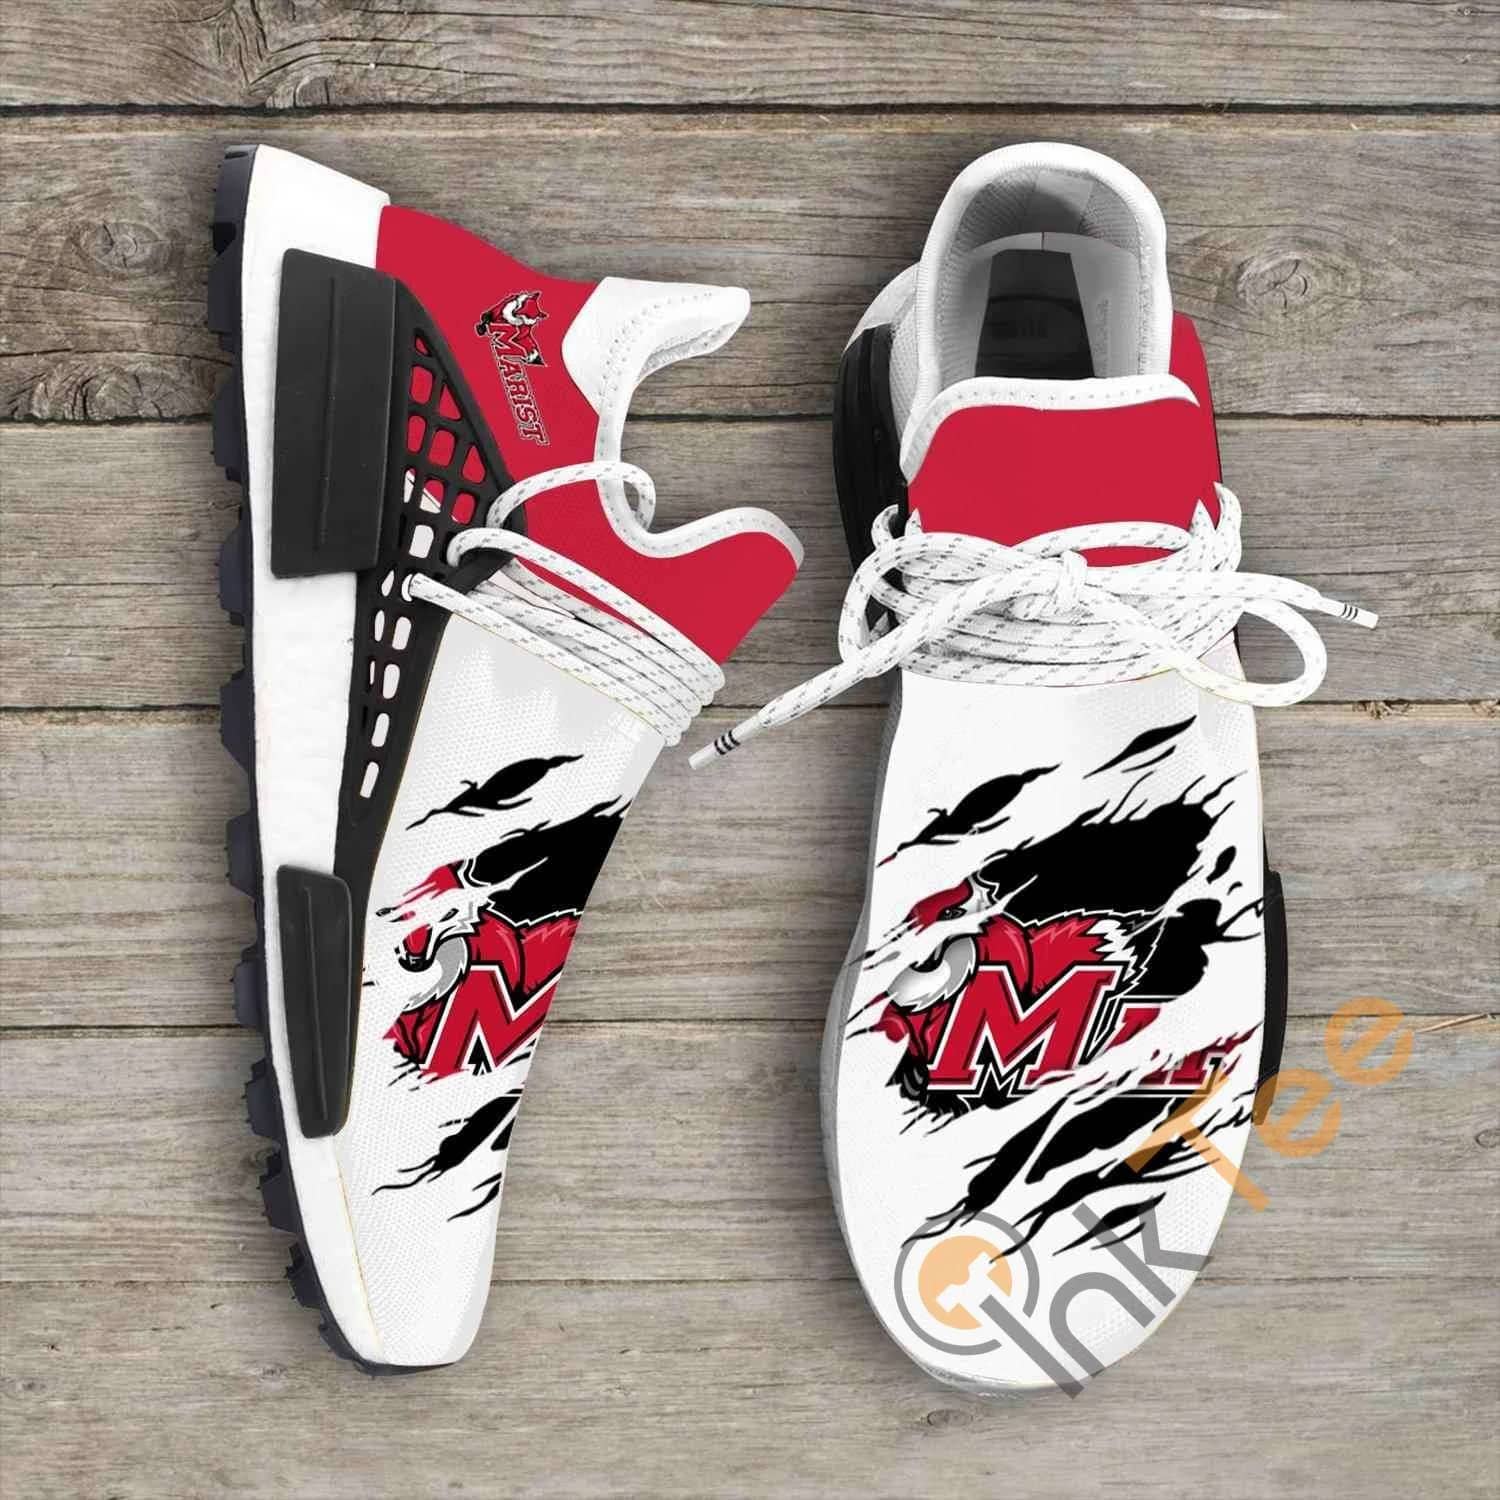 Marist Red Foxes Ncaa Ha02 NMD Human Shoes